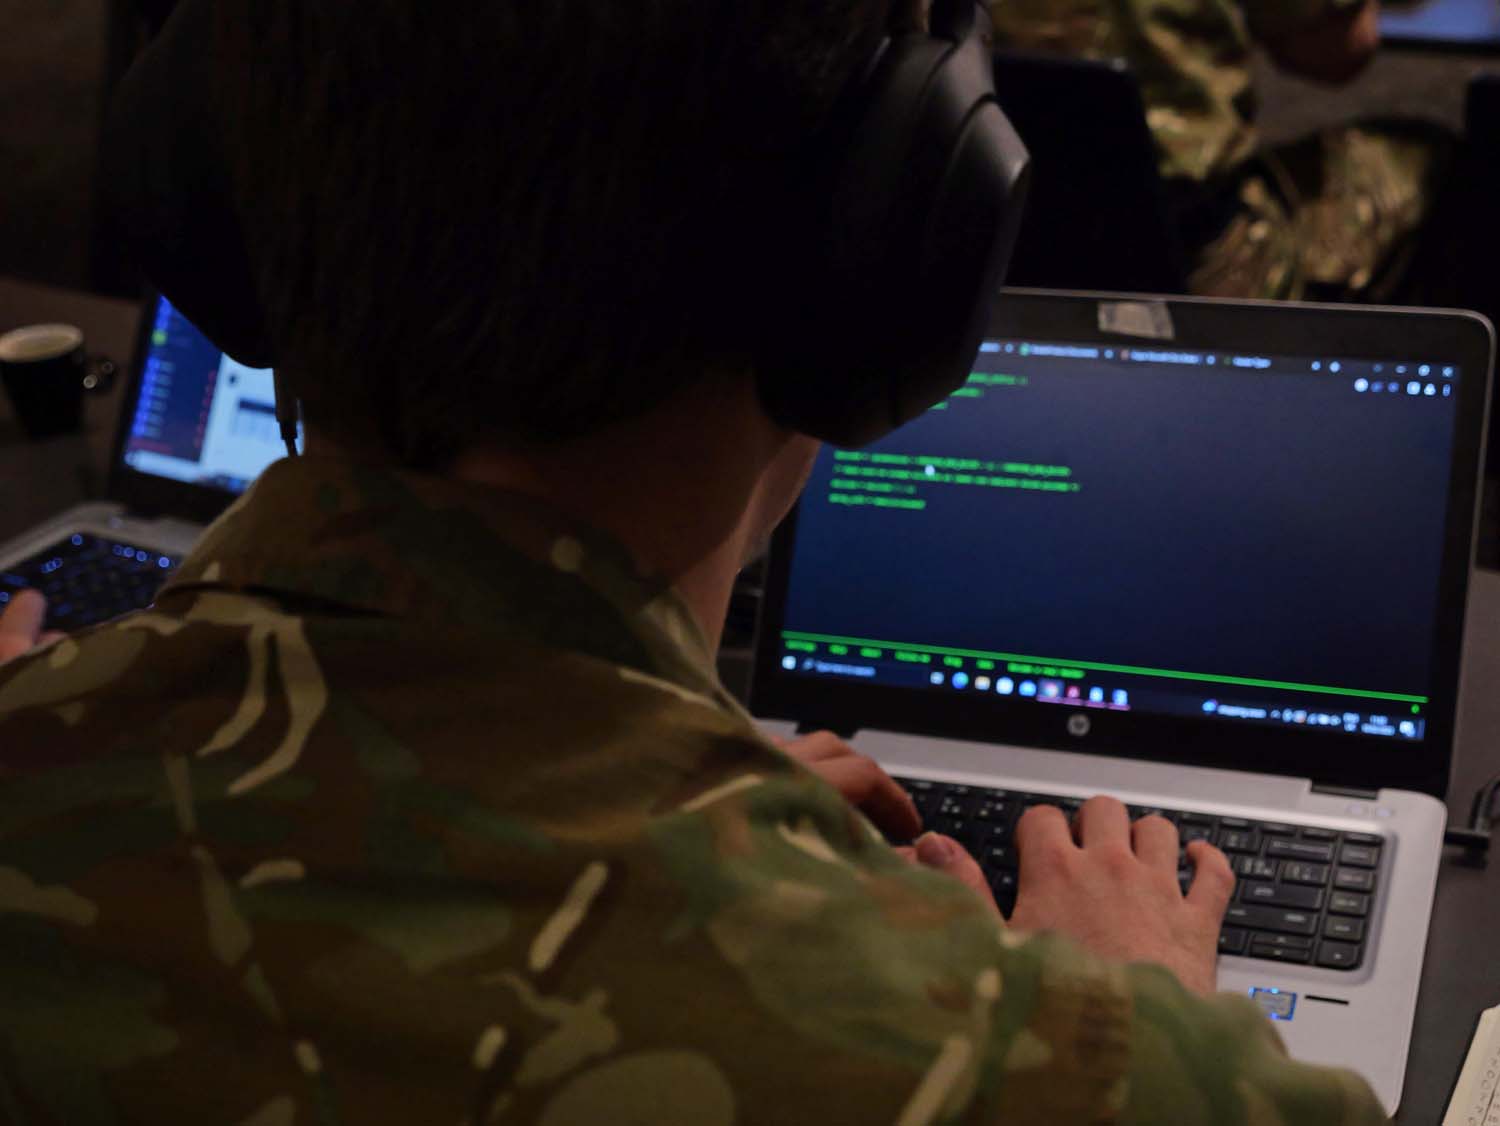 Royal Navy and Ukrainian cyber experts combine forces for cyberspace battle during Estonia exercises